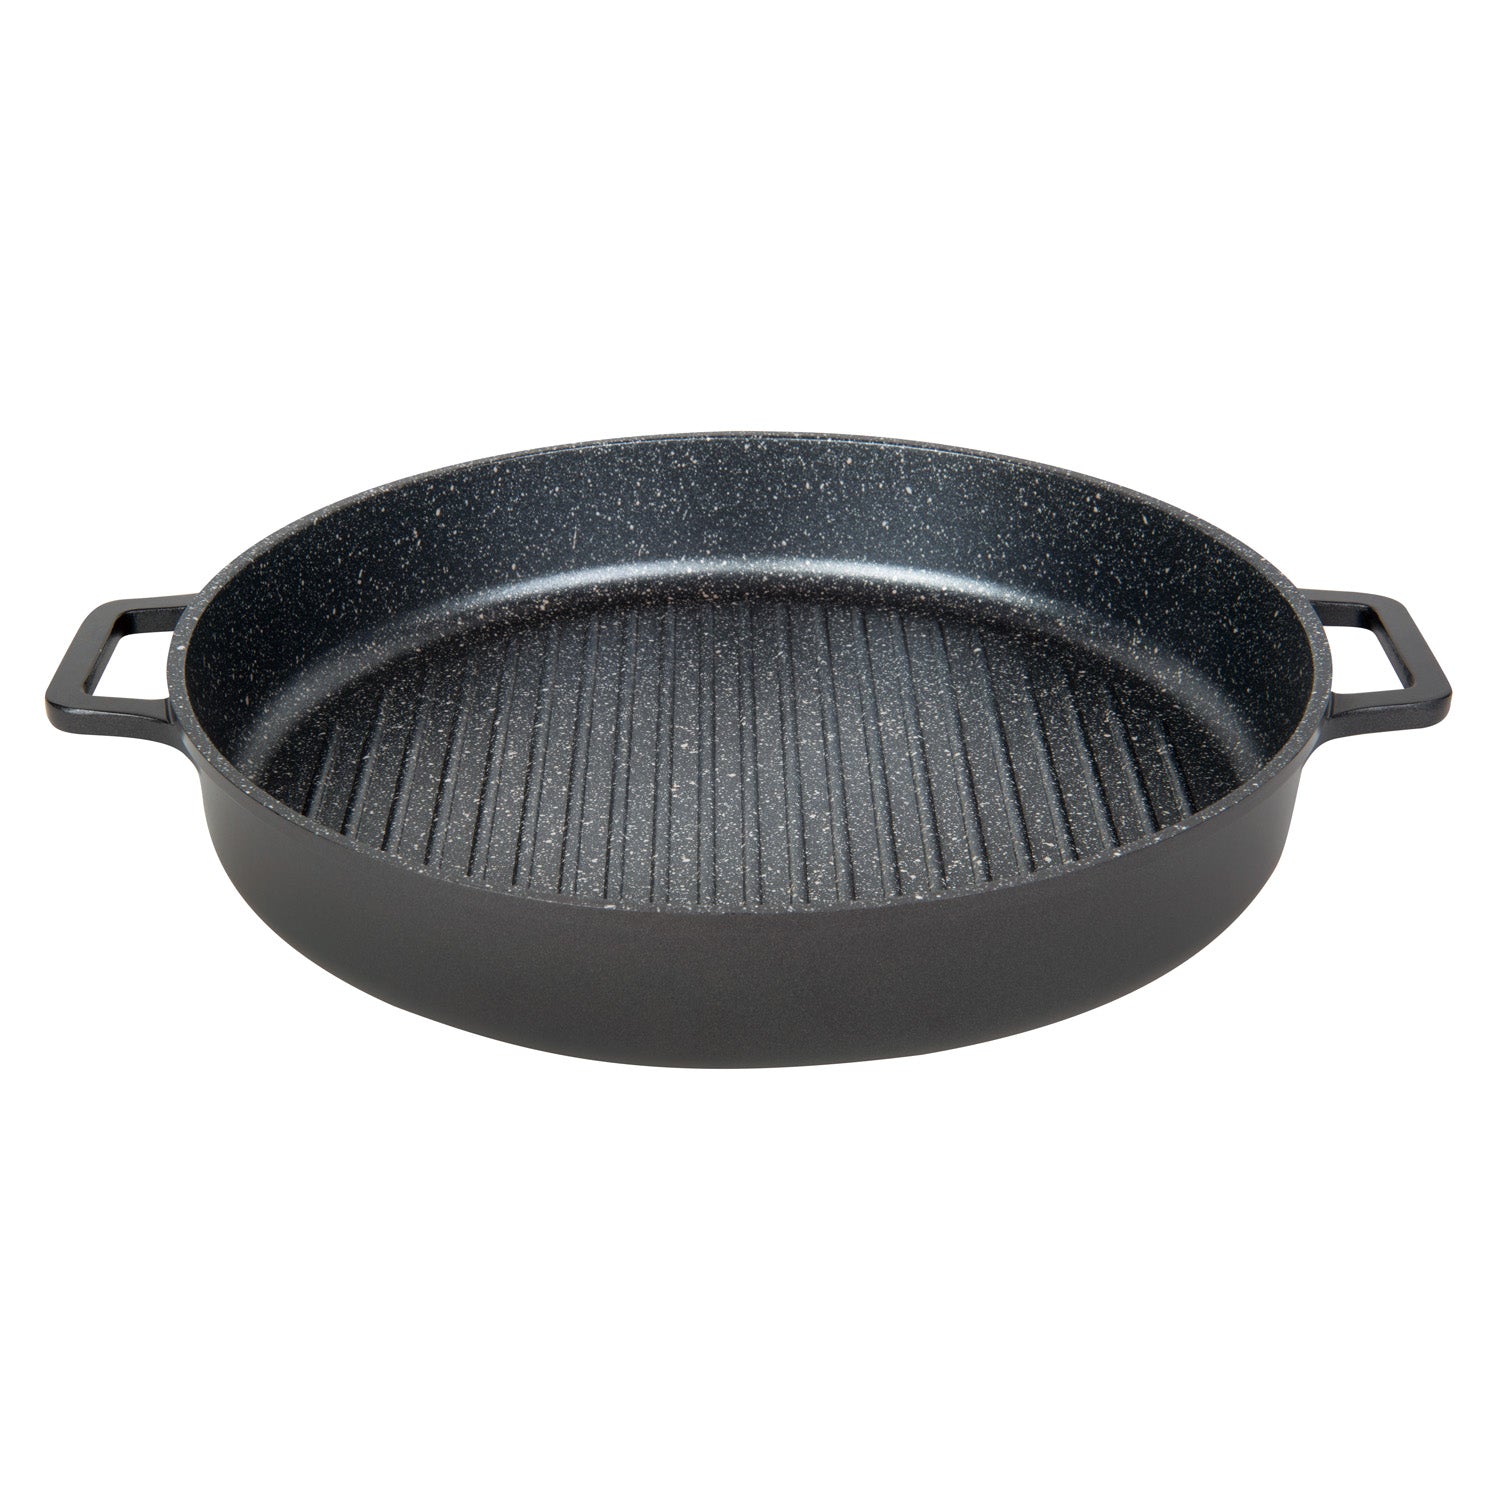 Risa Cast Iron, Oil-Coated Grill Pan for The Perfect Sear Grill on Oven, Stove, or Outdoor Grill | Works As Lid on Pots and Pans | Black, Deep Blue